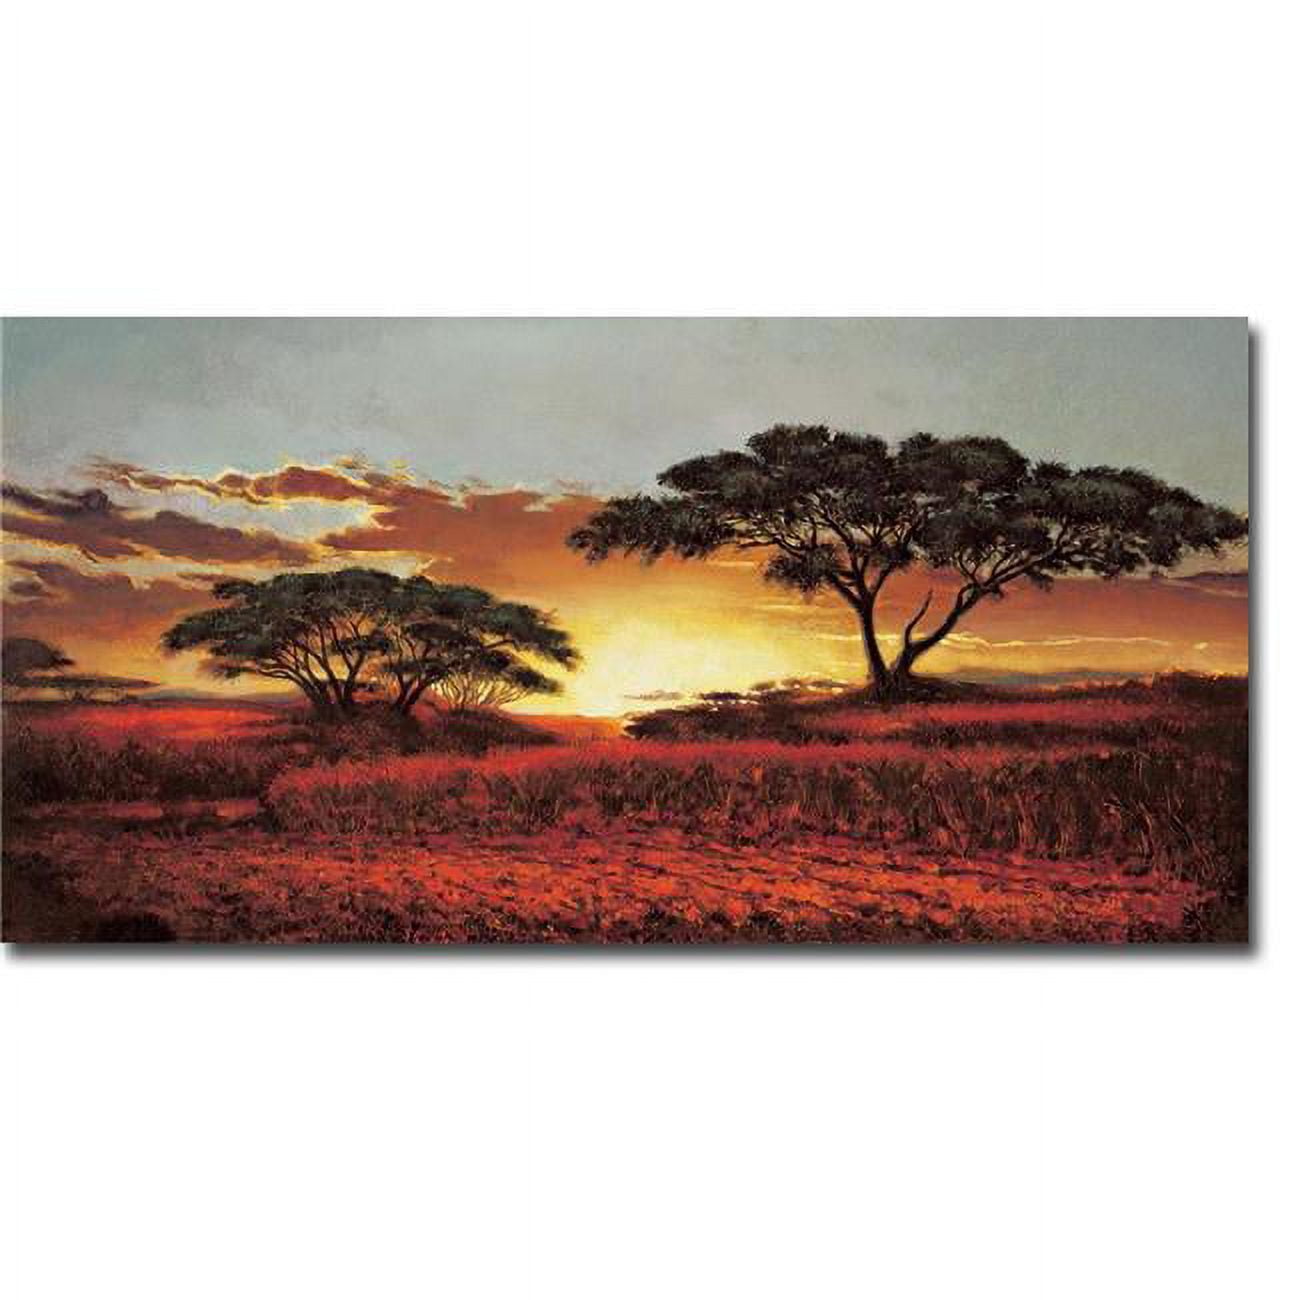 1224563tg Memories Of Serengeti By Madou Premium Gallery-wrapped Canvas Giclee Art - Ready To Hang, 12 X 24 In.